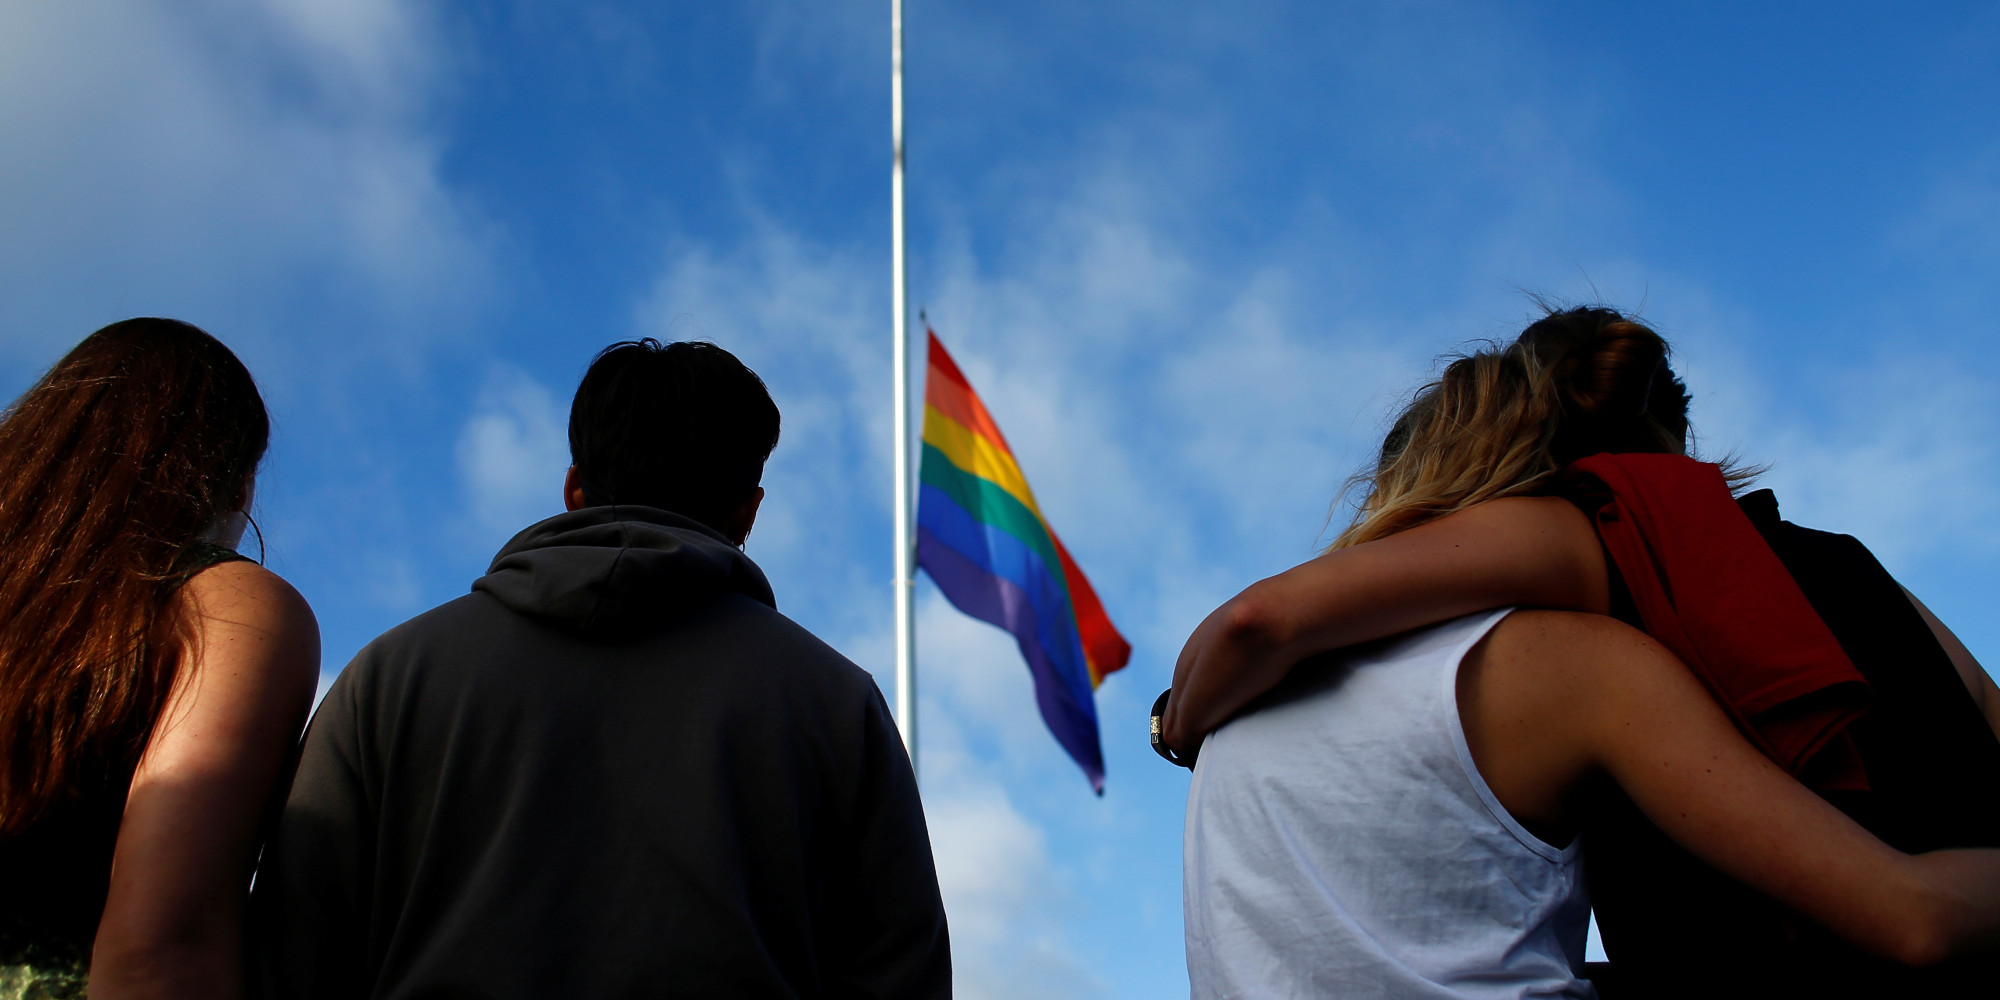 Mourners gather under a LGBT pride flag flying at half-mast for a candlelight vigil in remembrance for mass shooting victims in Orlando, from San Diego, California